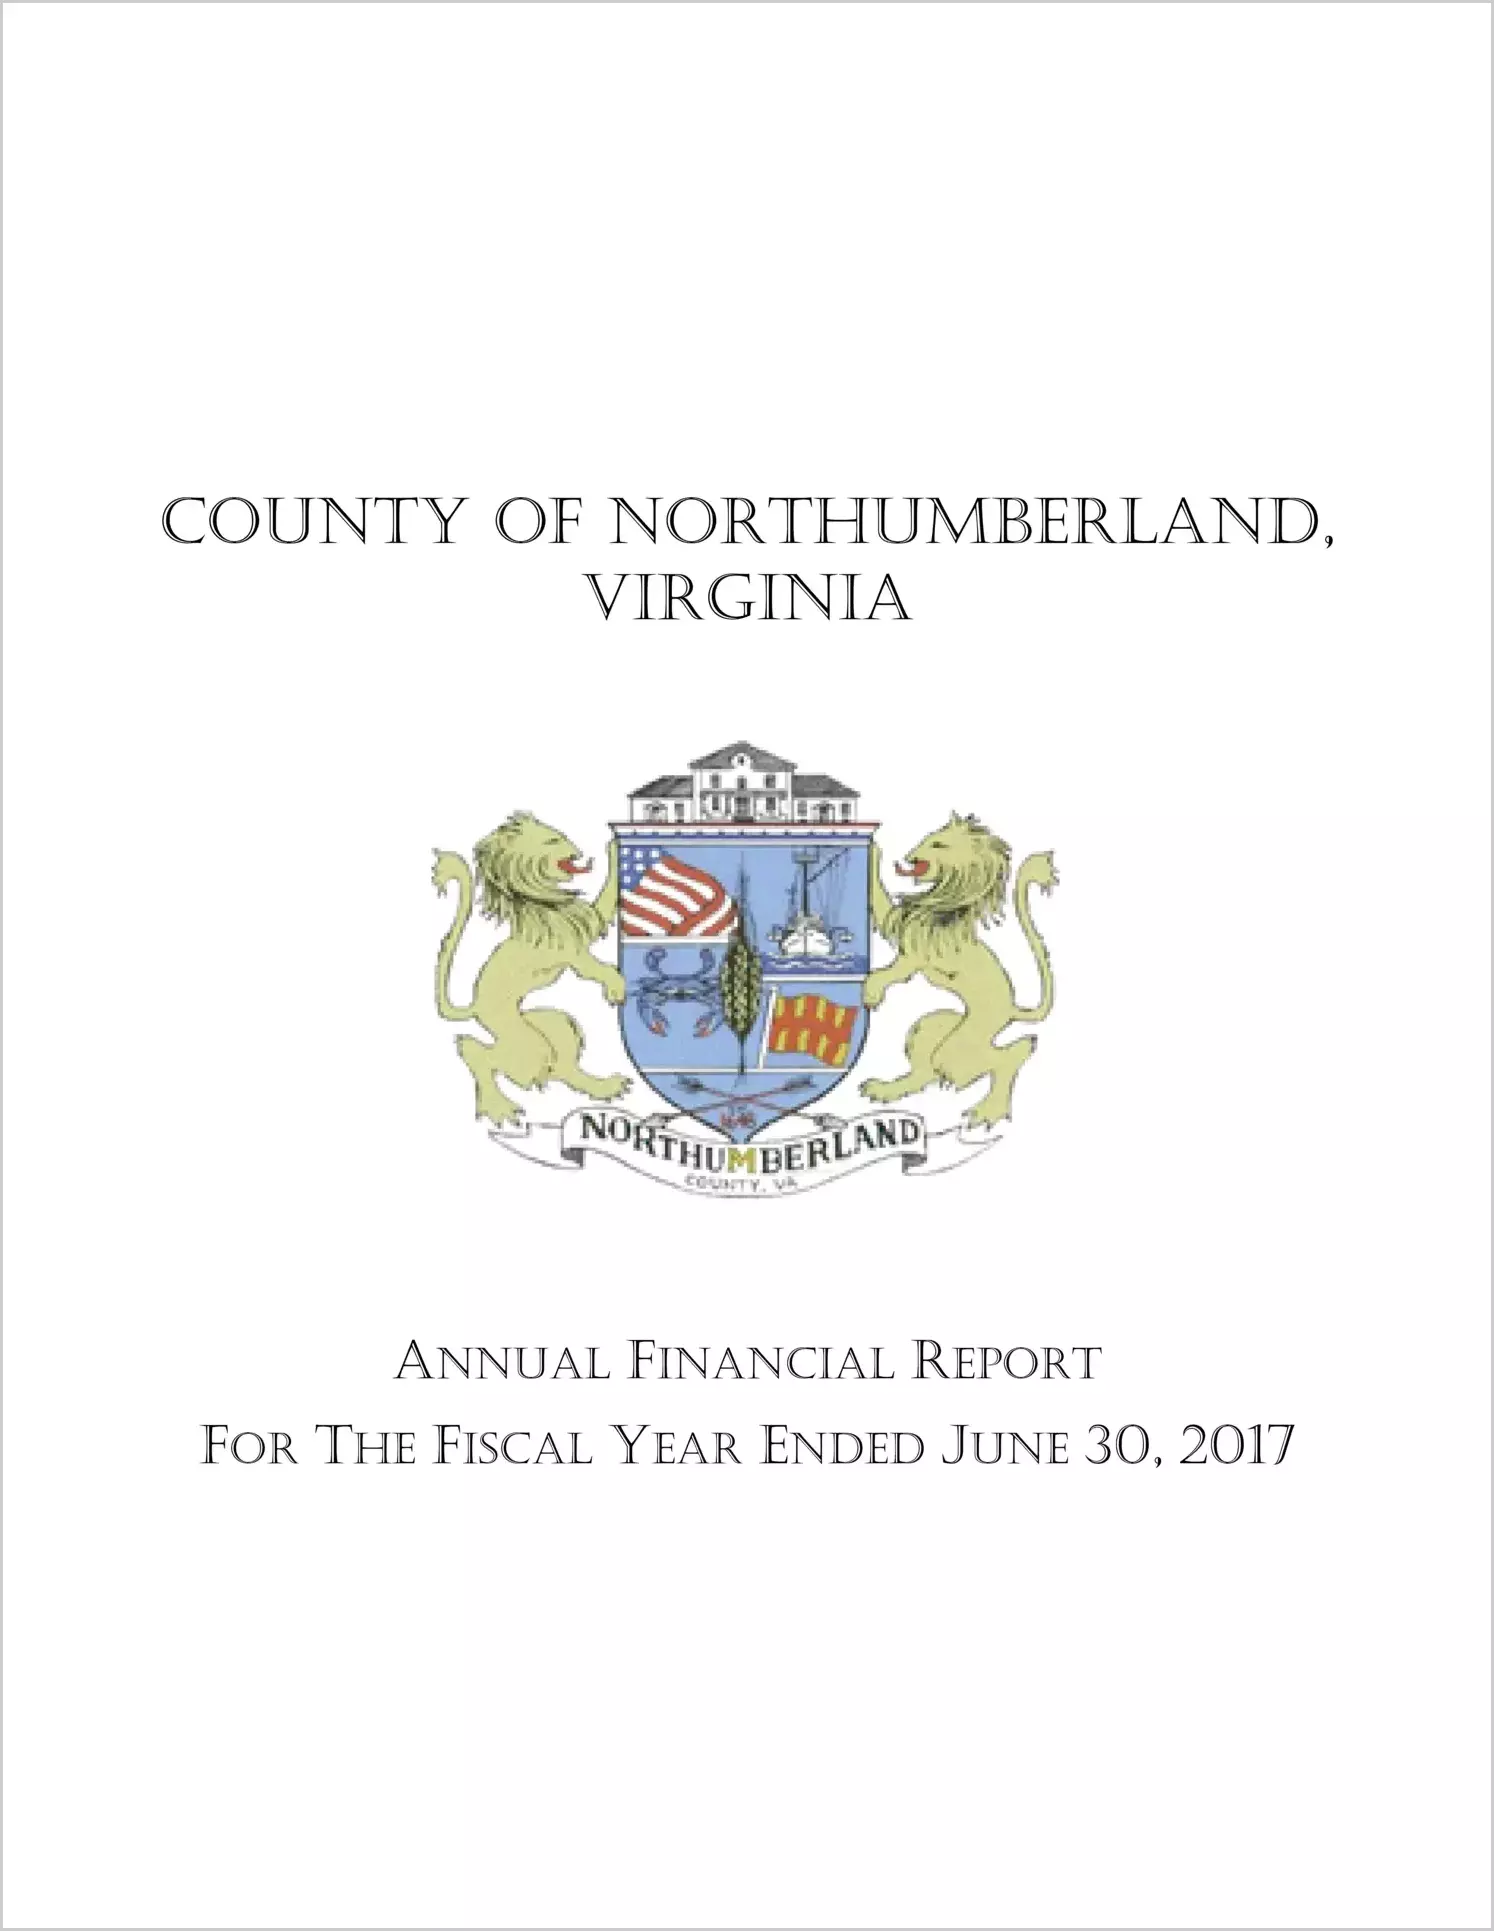 2017 Annual Financial Report for County of Northumberland